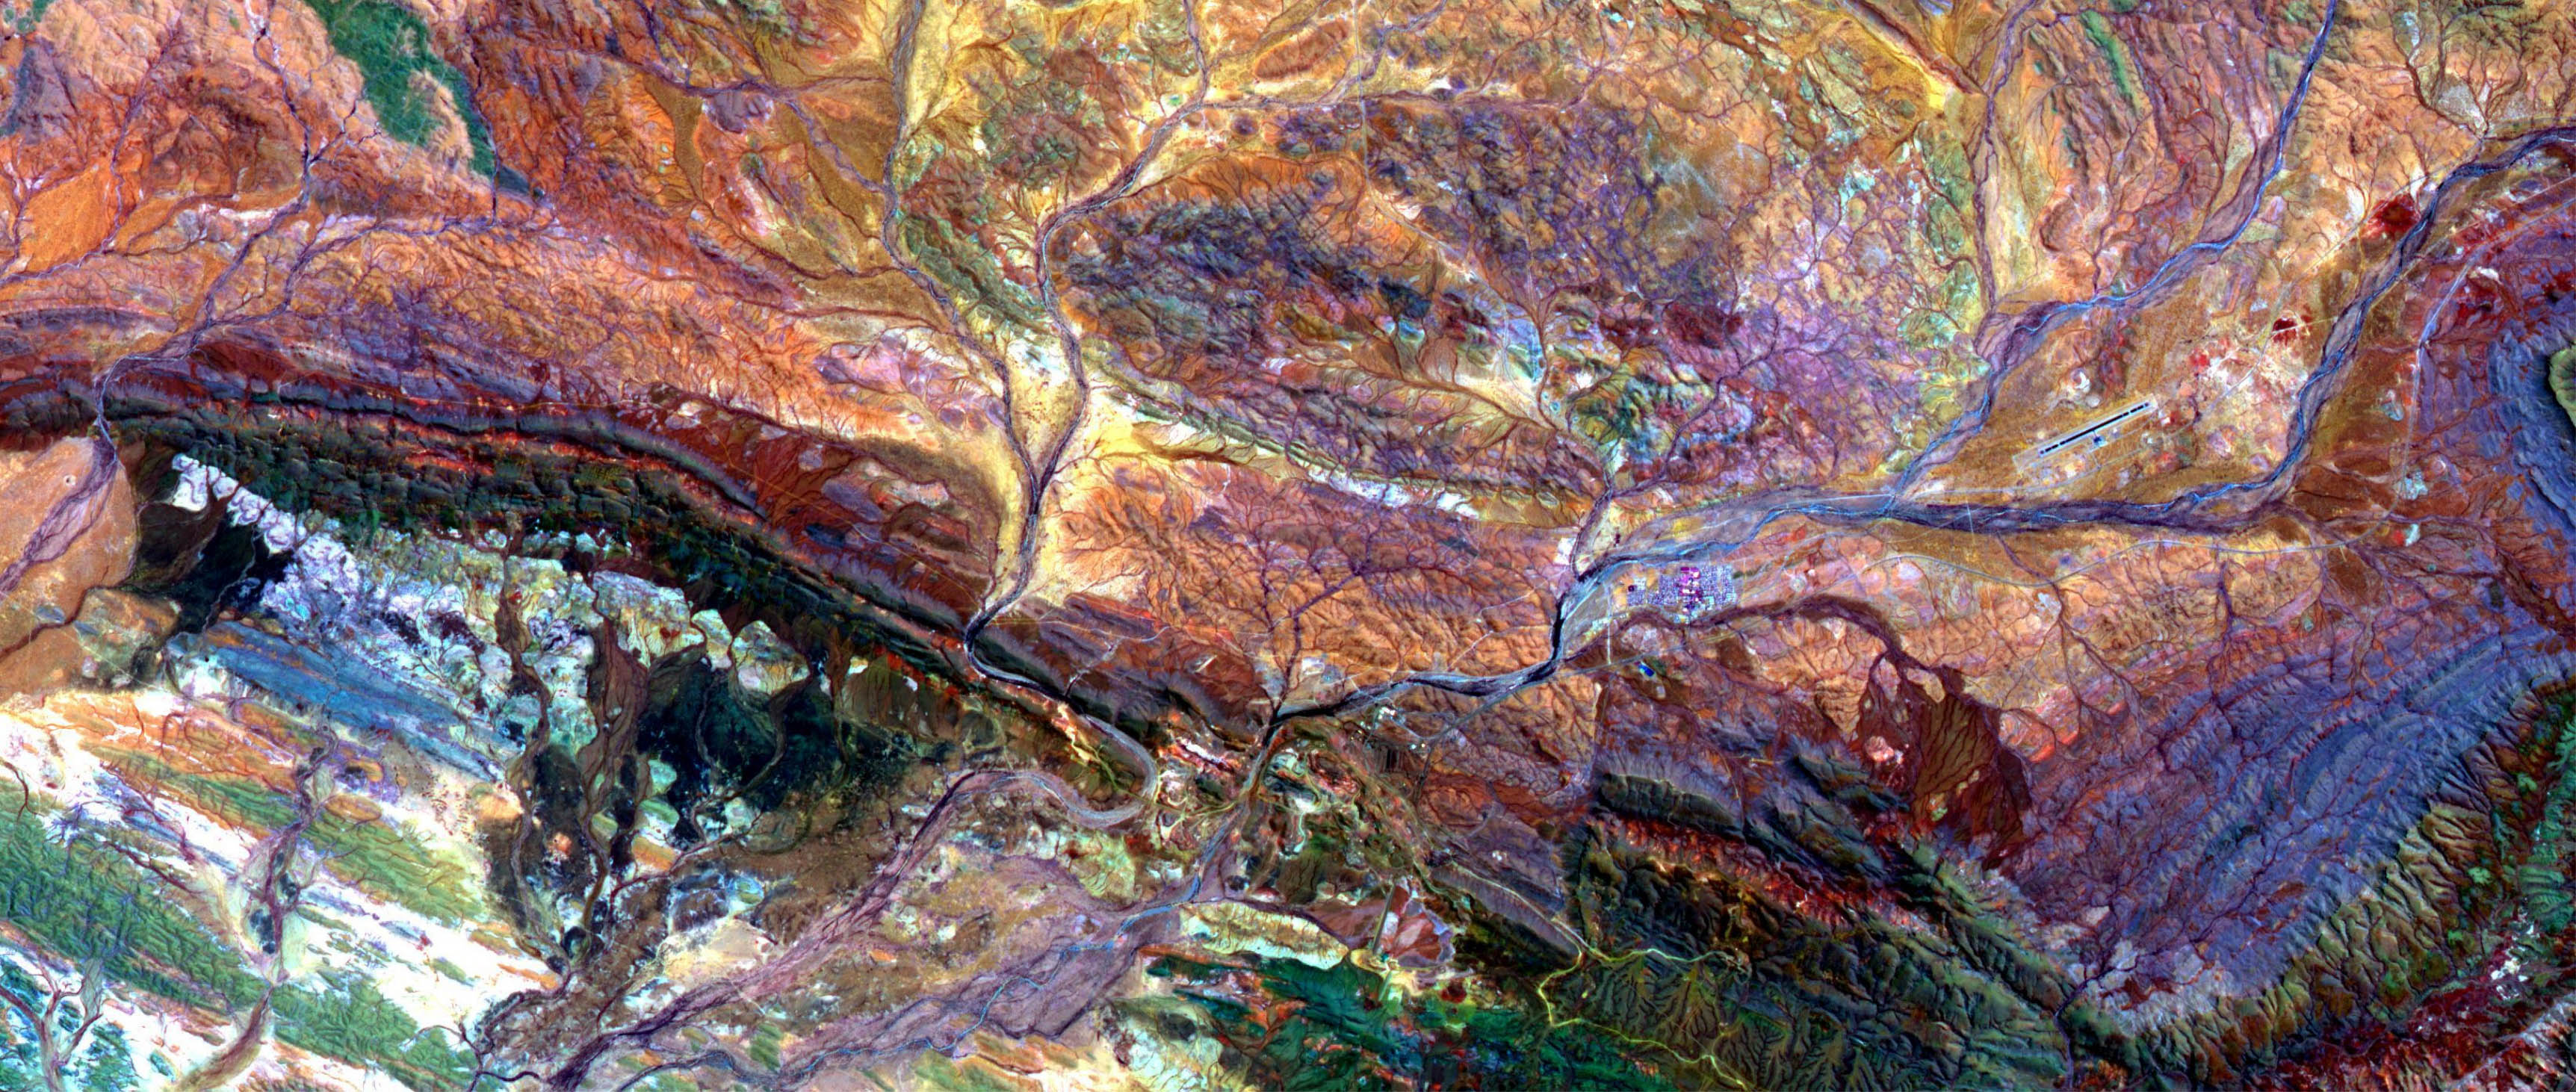 NASA – The Pilbara in northwestern Australia exposes some of the oldest rocks on Earth, over 3.6 billion years old.